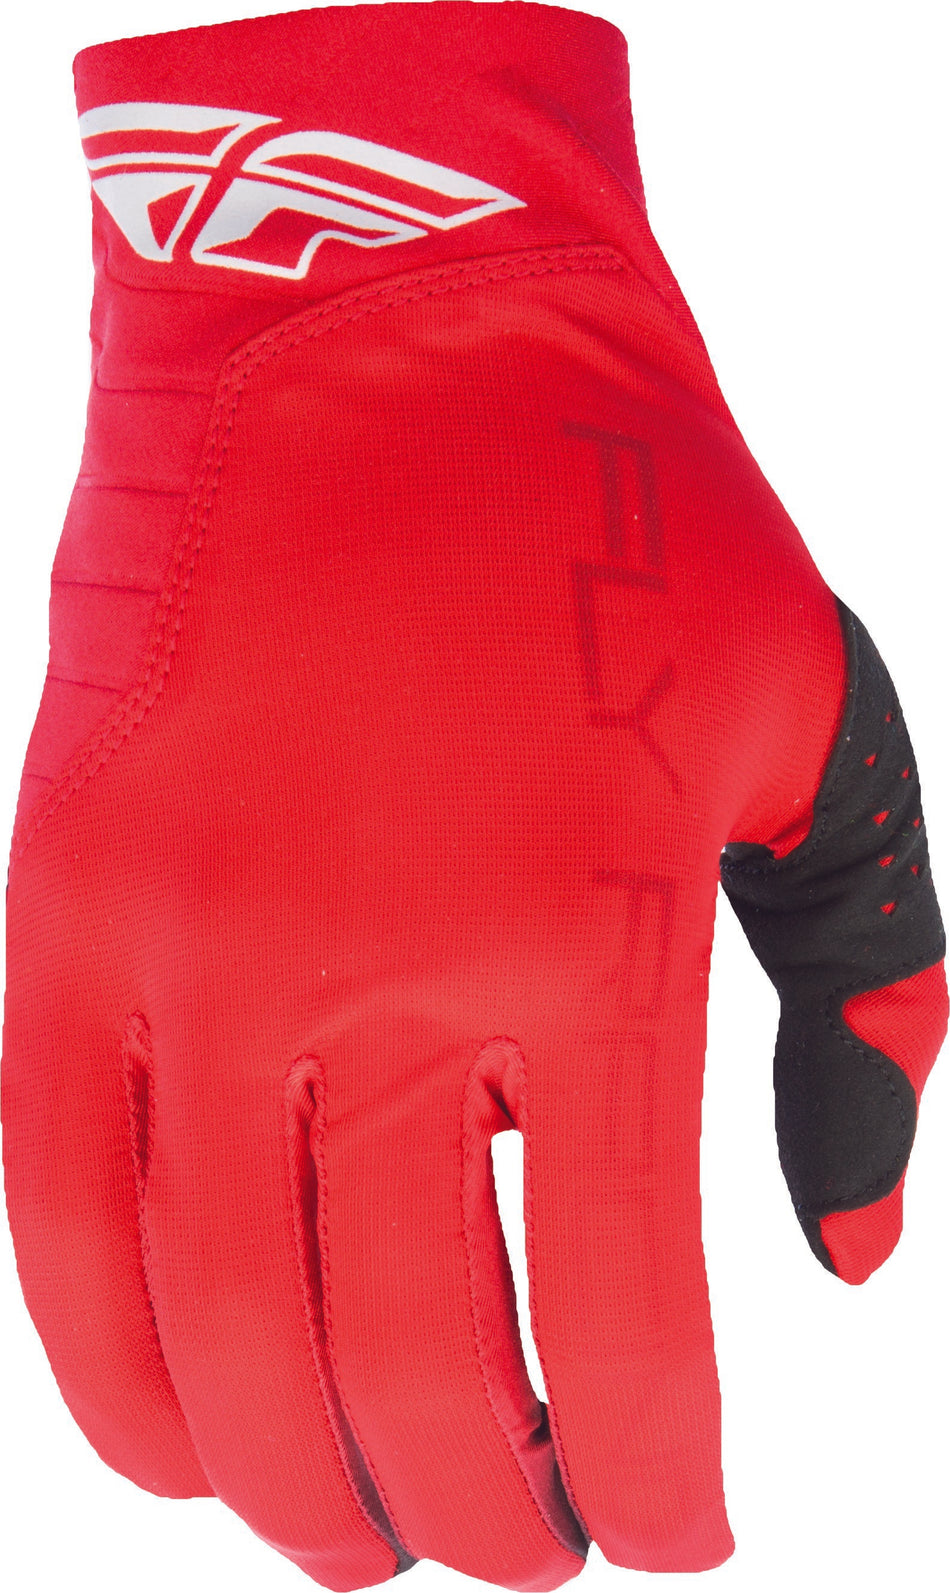 FLY RACING Pro Lite Glove Red Sz 7 Xs 370-81207